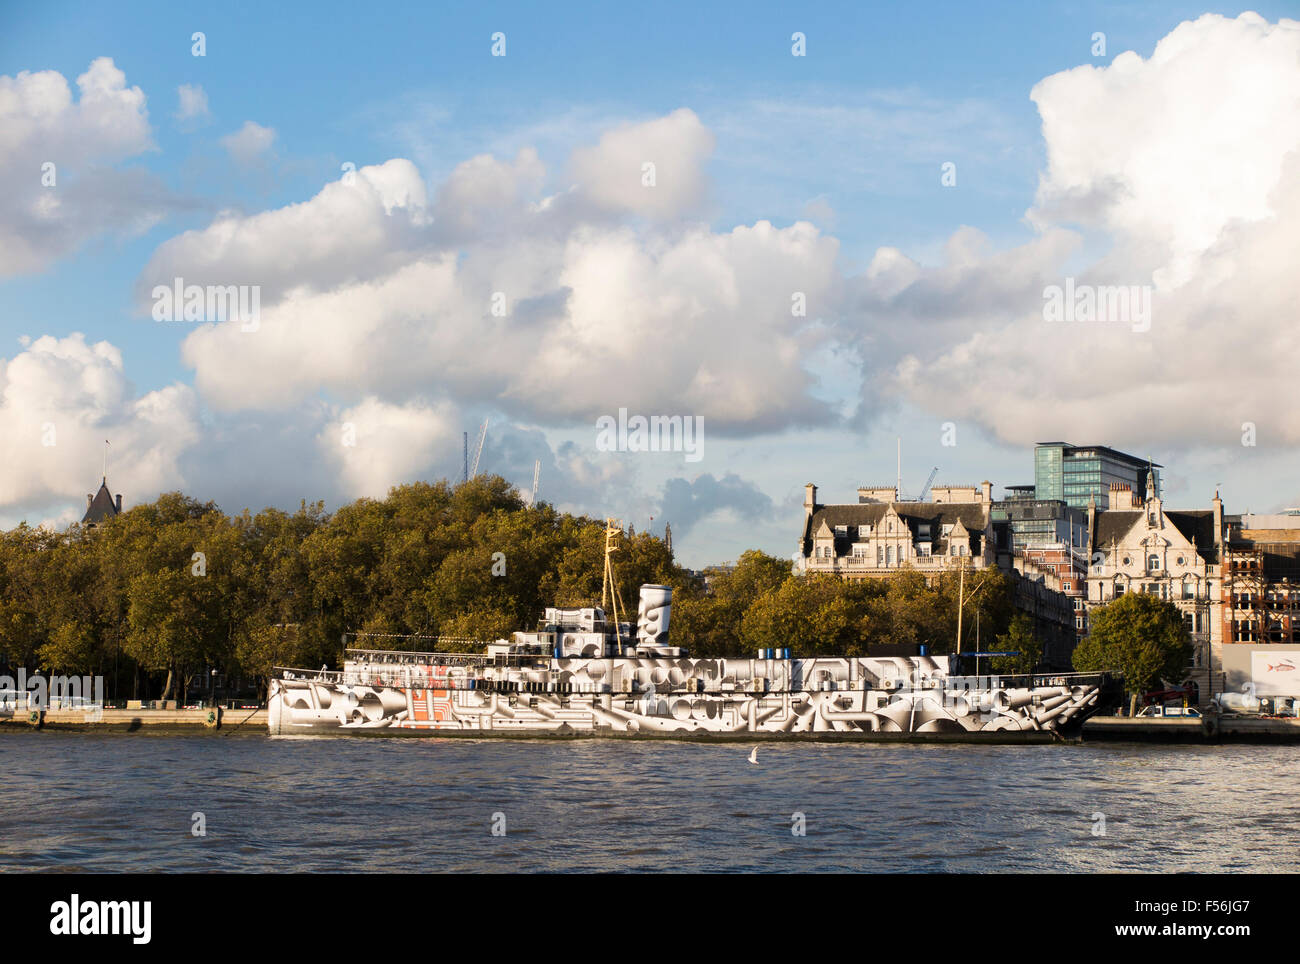 HMS President, a Grimsby Class sloop moored on the Embankment, London, one of three surviving WW1 warships, painted in a dazzle design Stock Photo